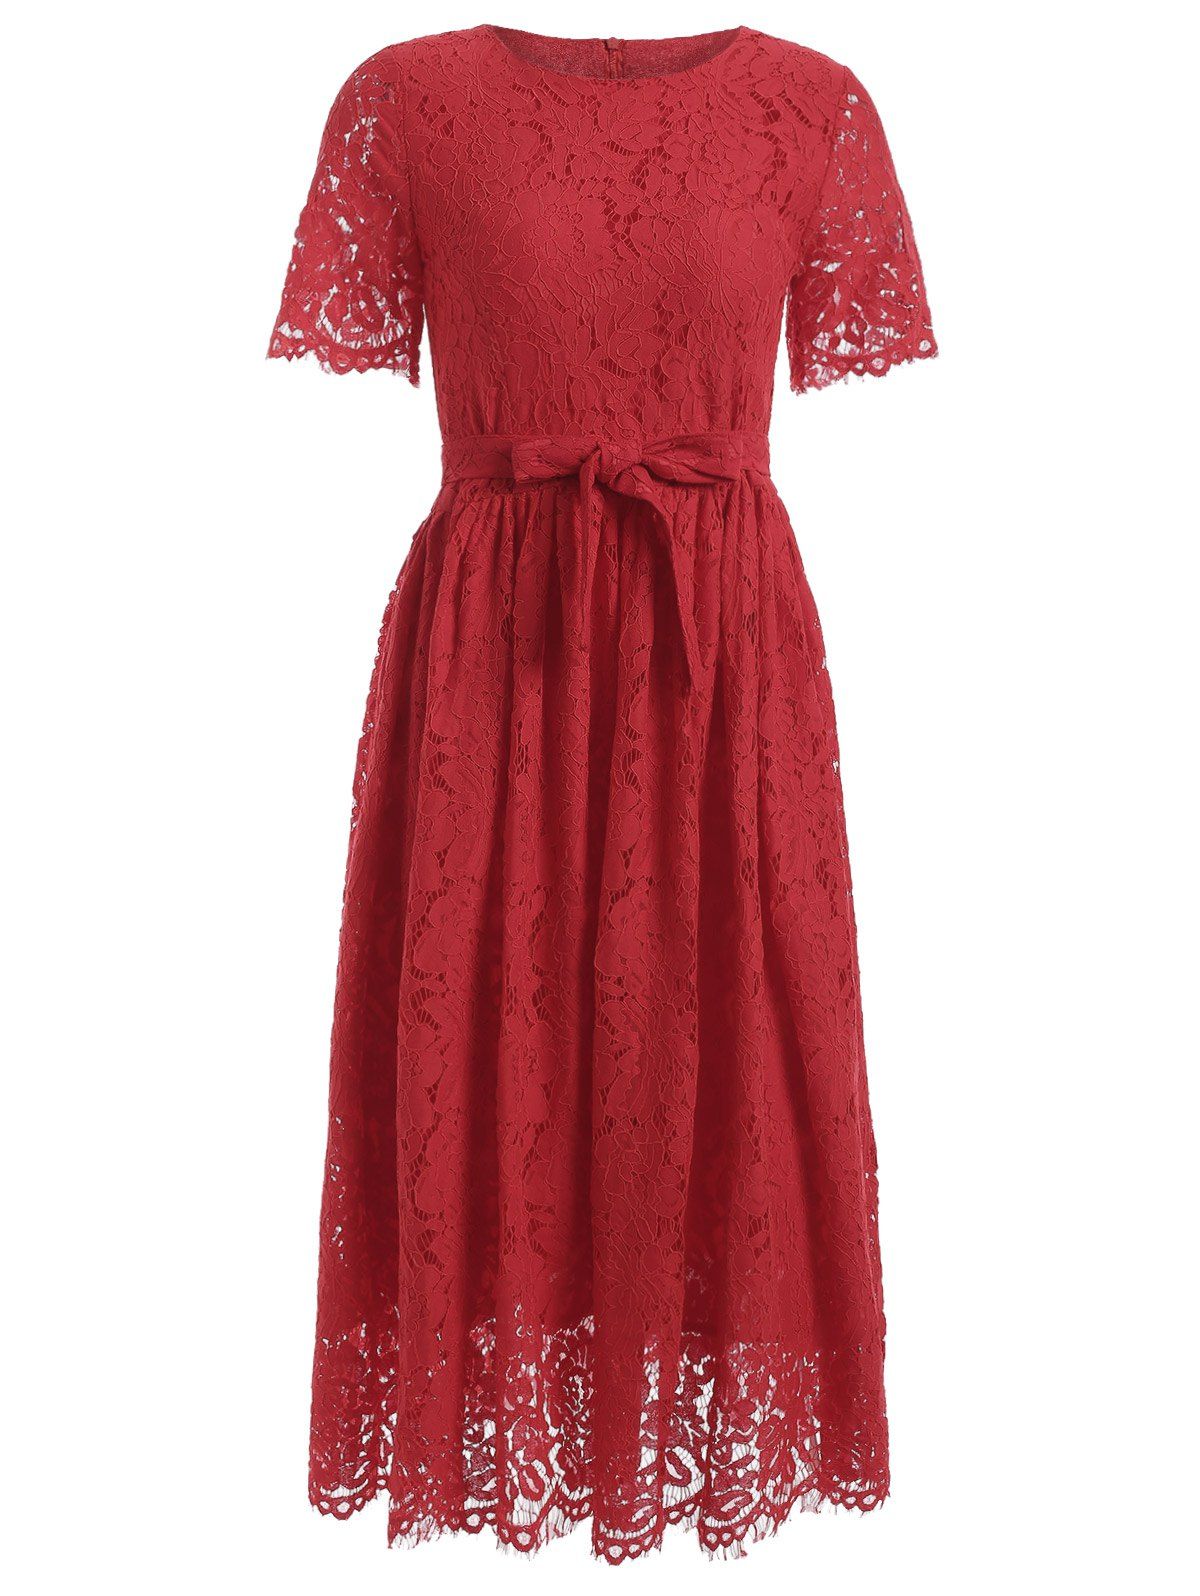 [17% OFF] 2021 Belted High Waisted Midi Lace Dress In RED | DressLily